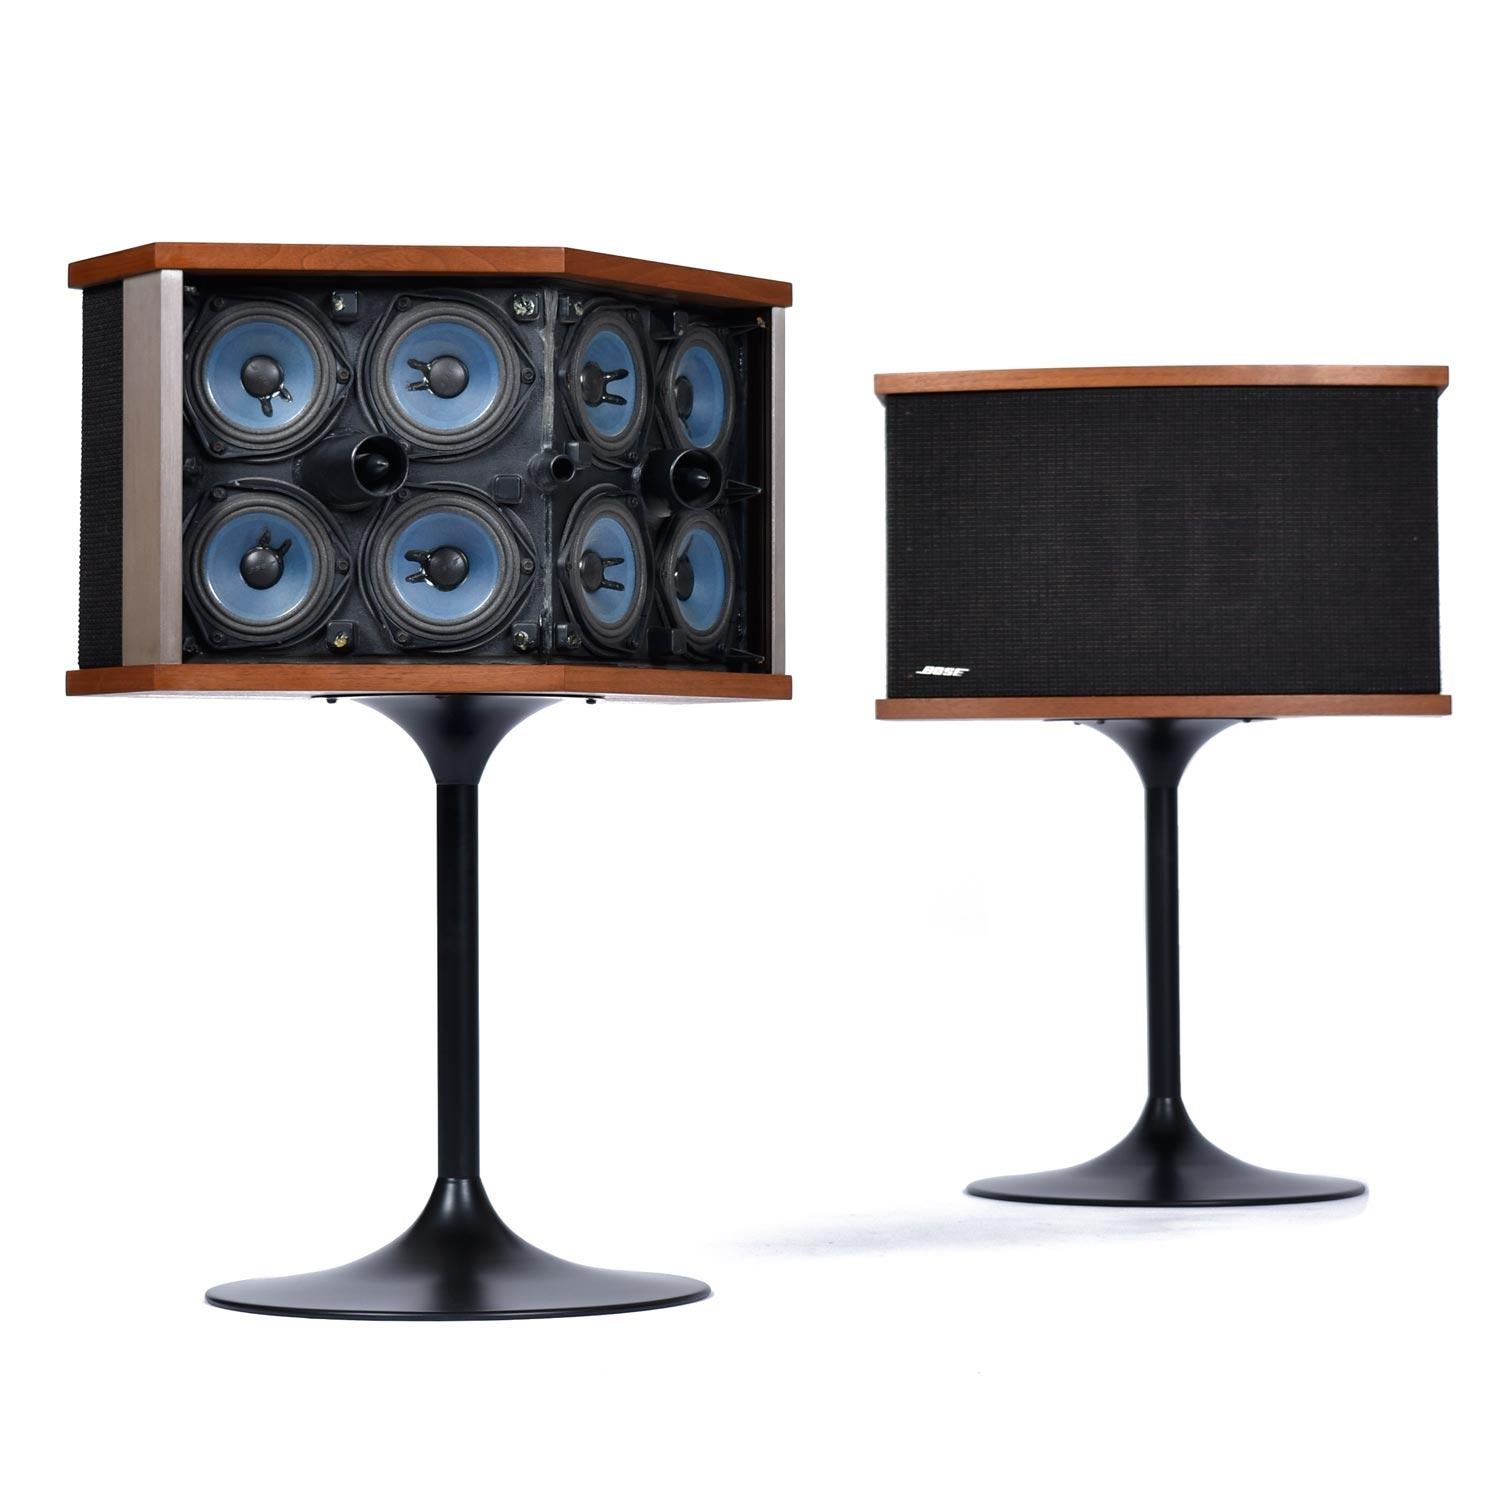 Pair of restored vintage Bose 901 Series V (8 Ohm, wired) speakers on Eero Saarinen style tulip bases. The manual copyright is dated 